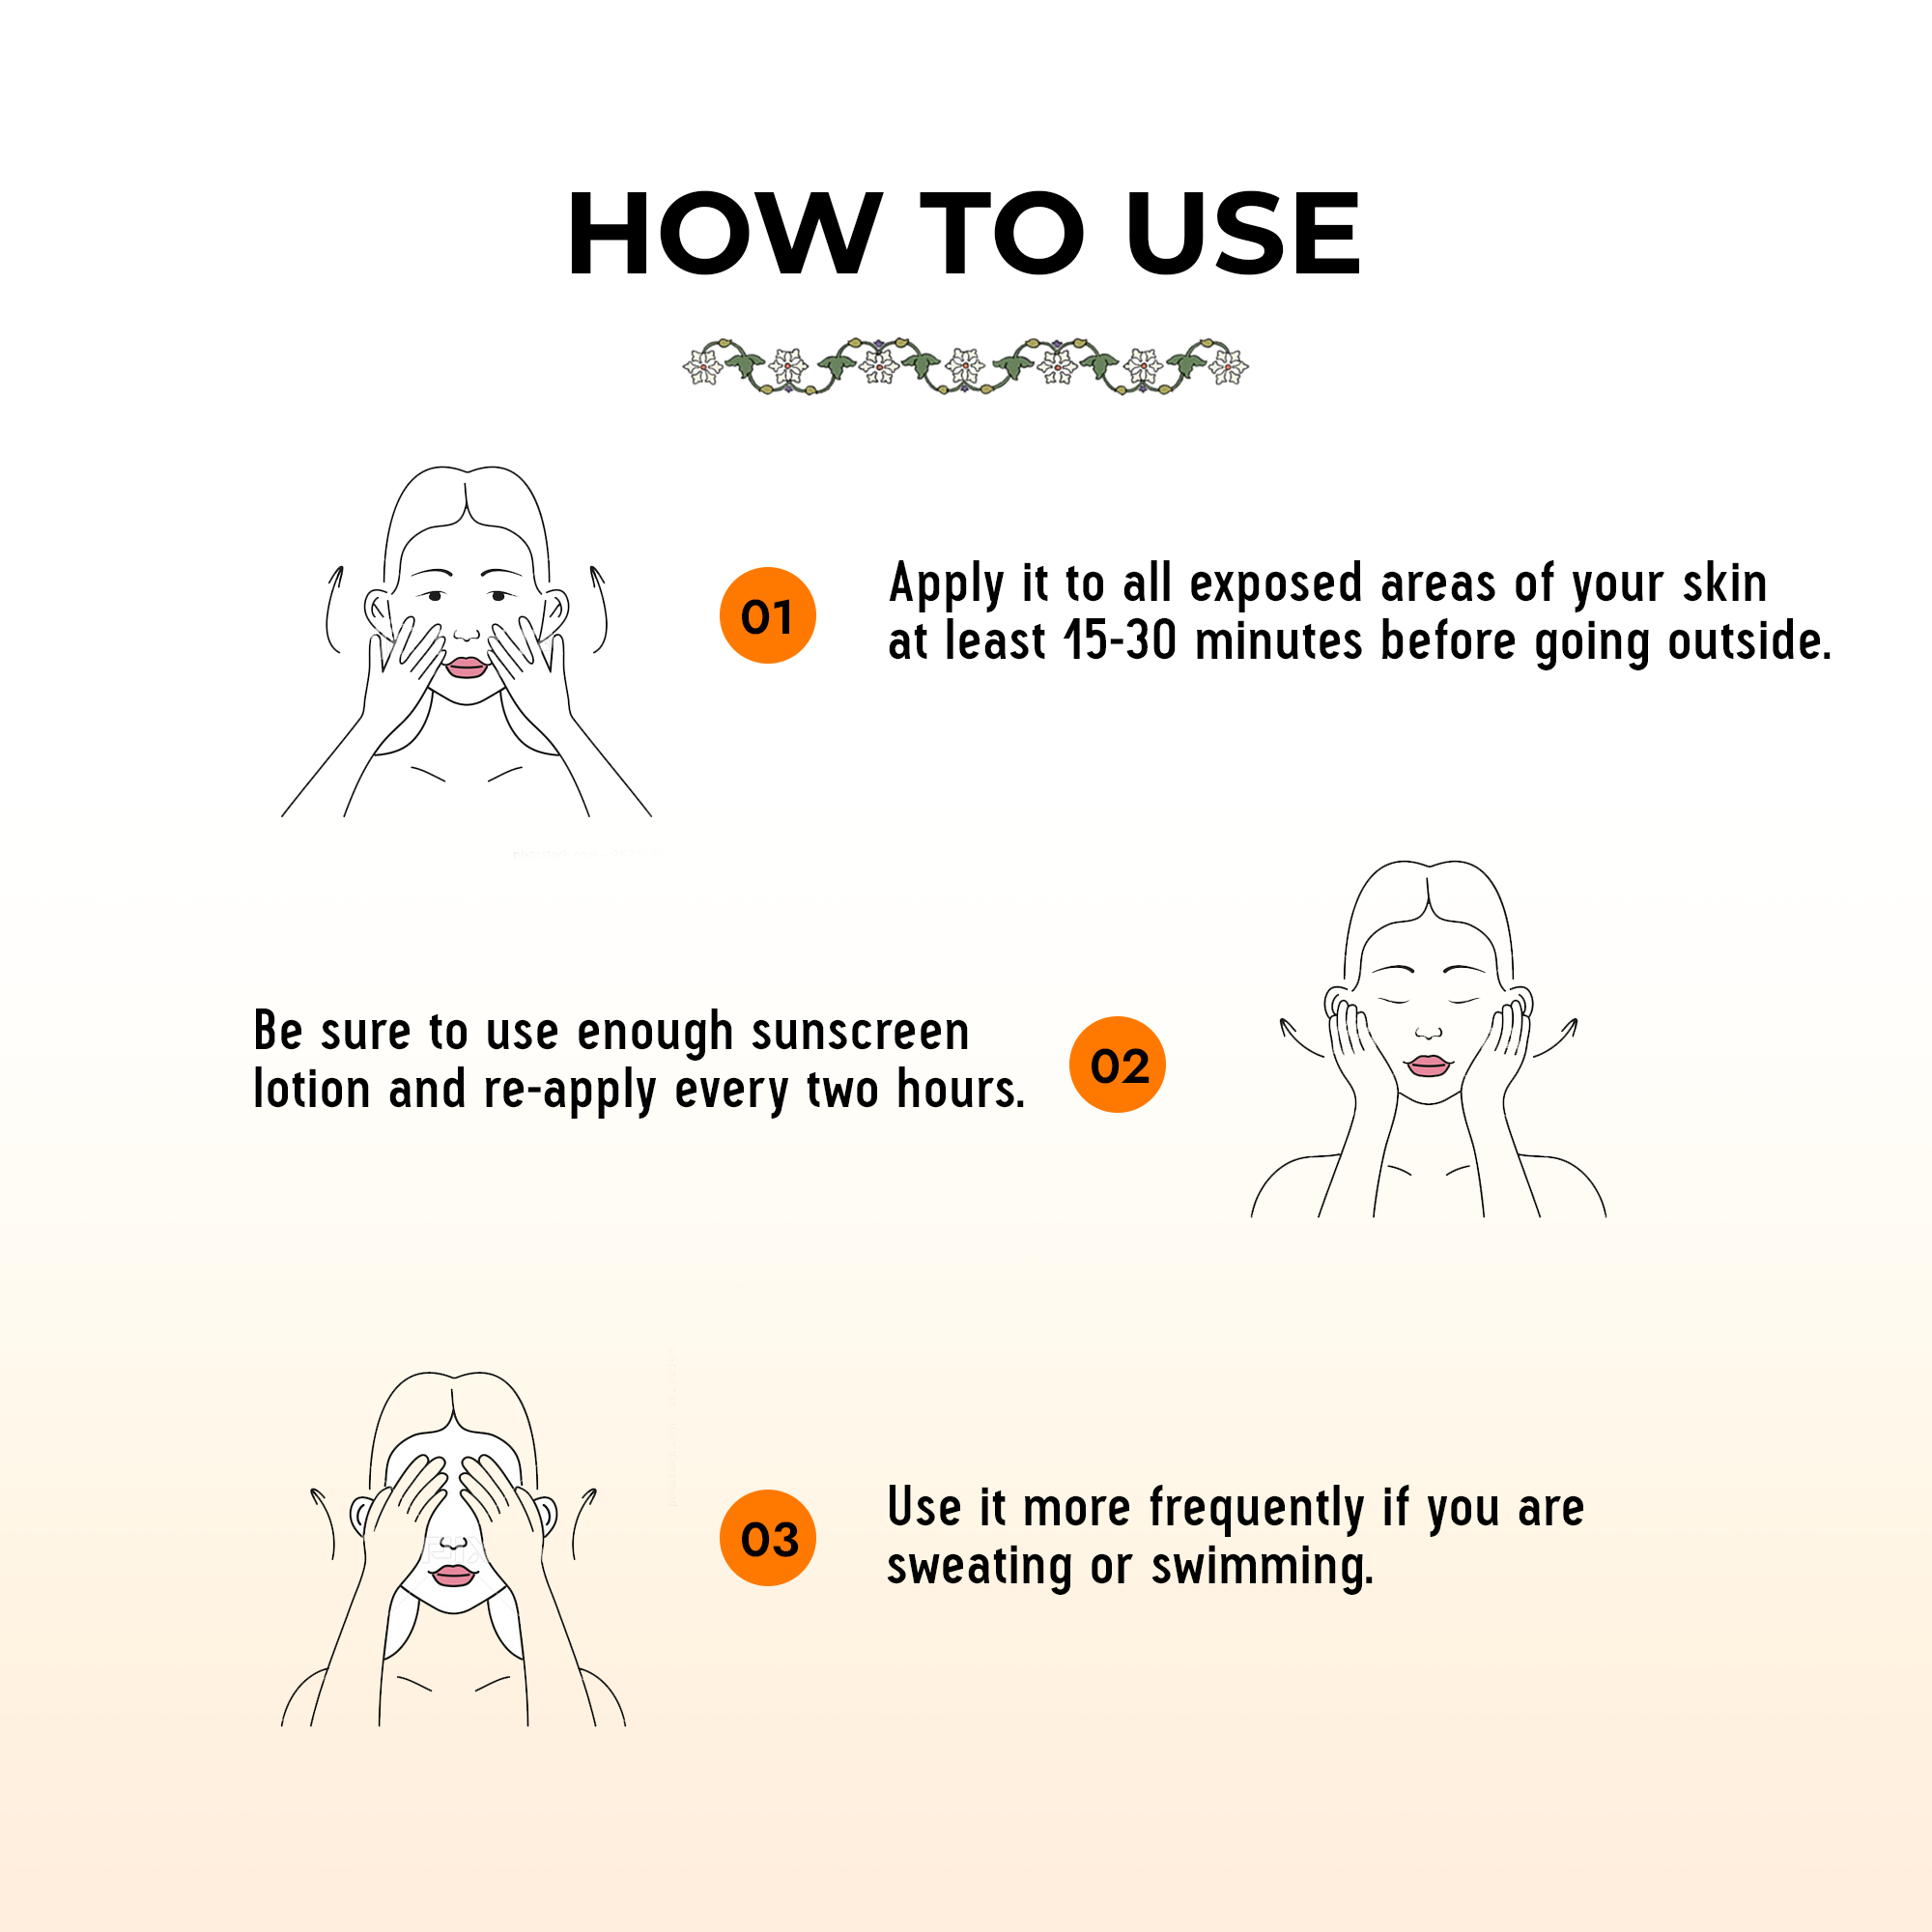 How to use sunscreen for de tan